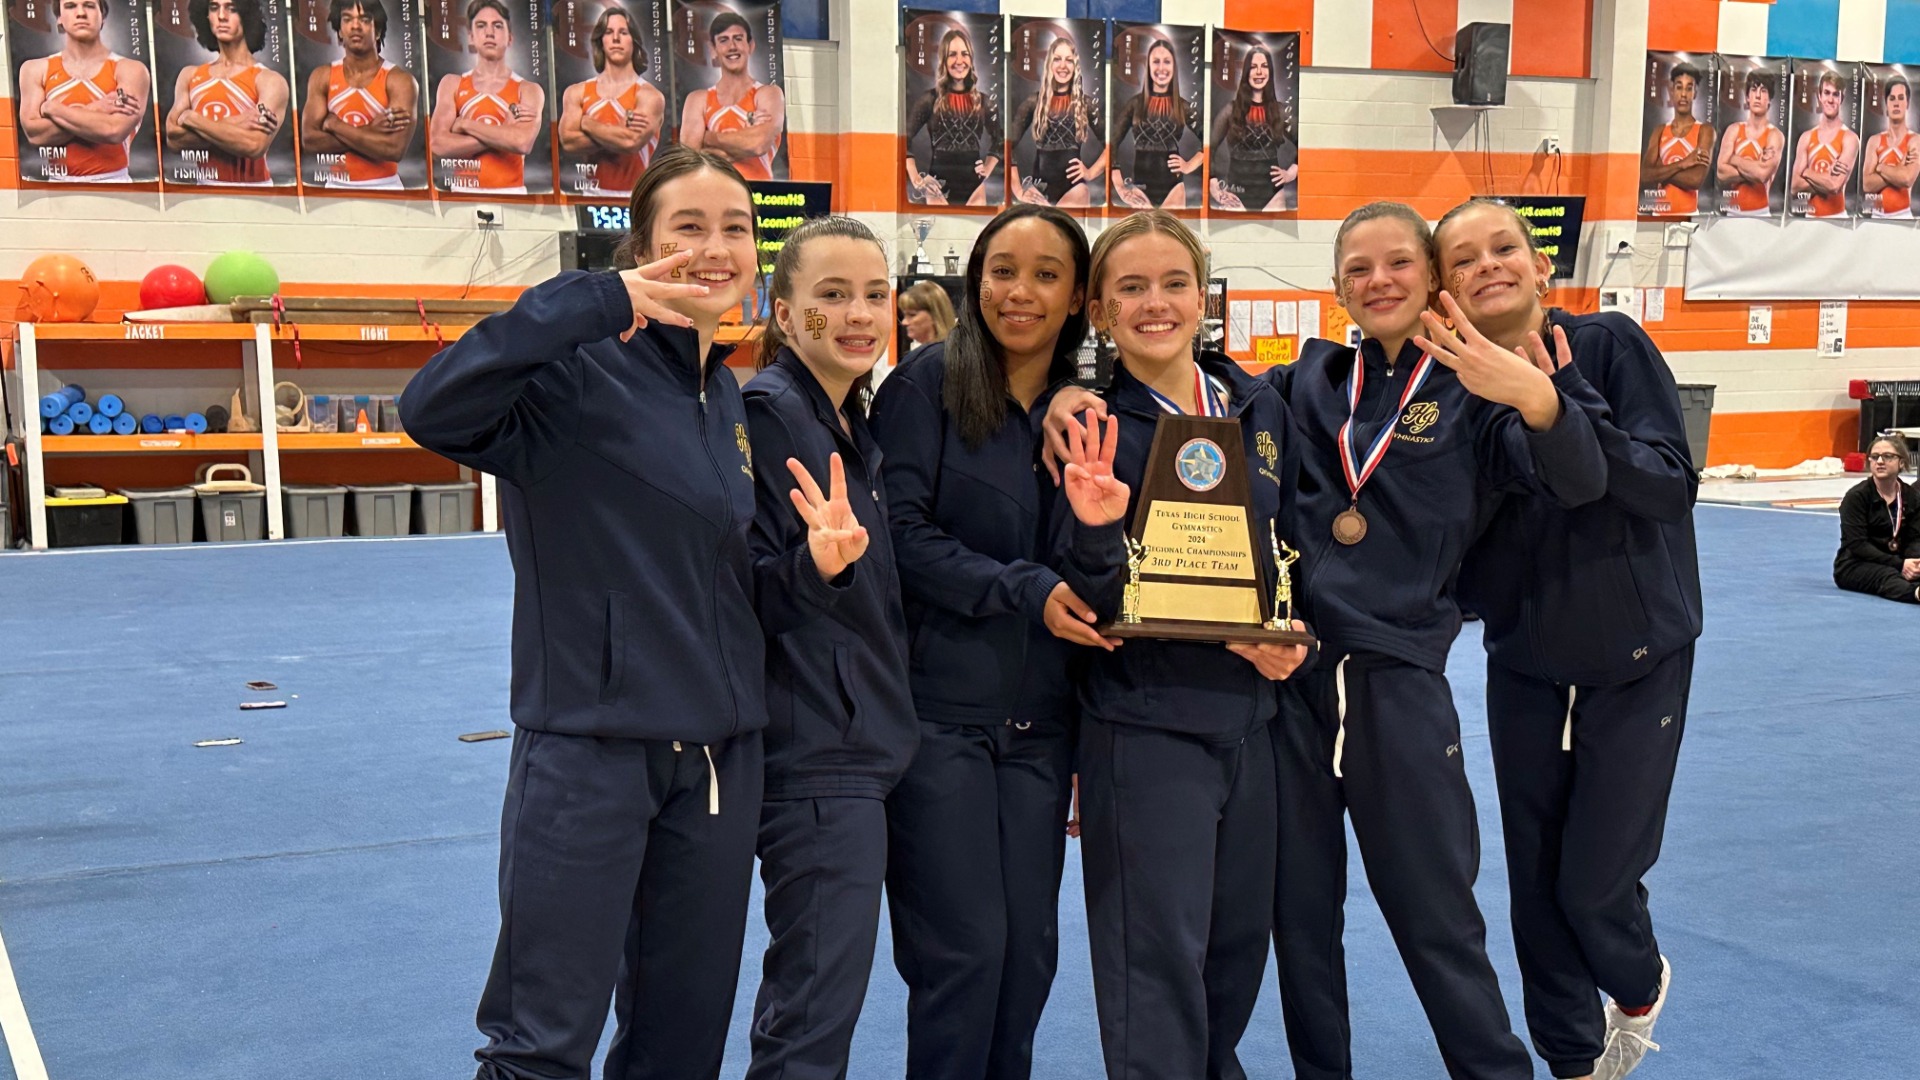 Slide 6 - Lady Scots Gymnastics Team Places 3rd at Regional Championships